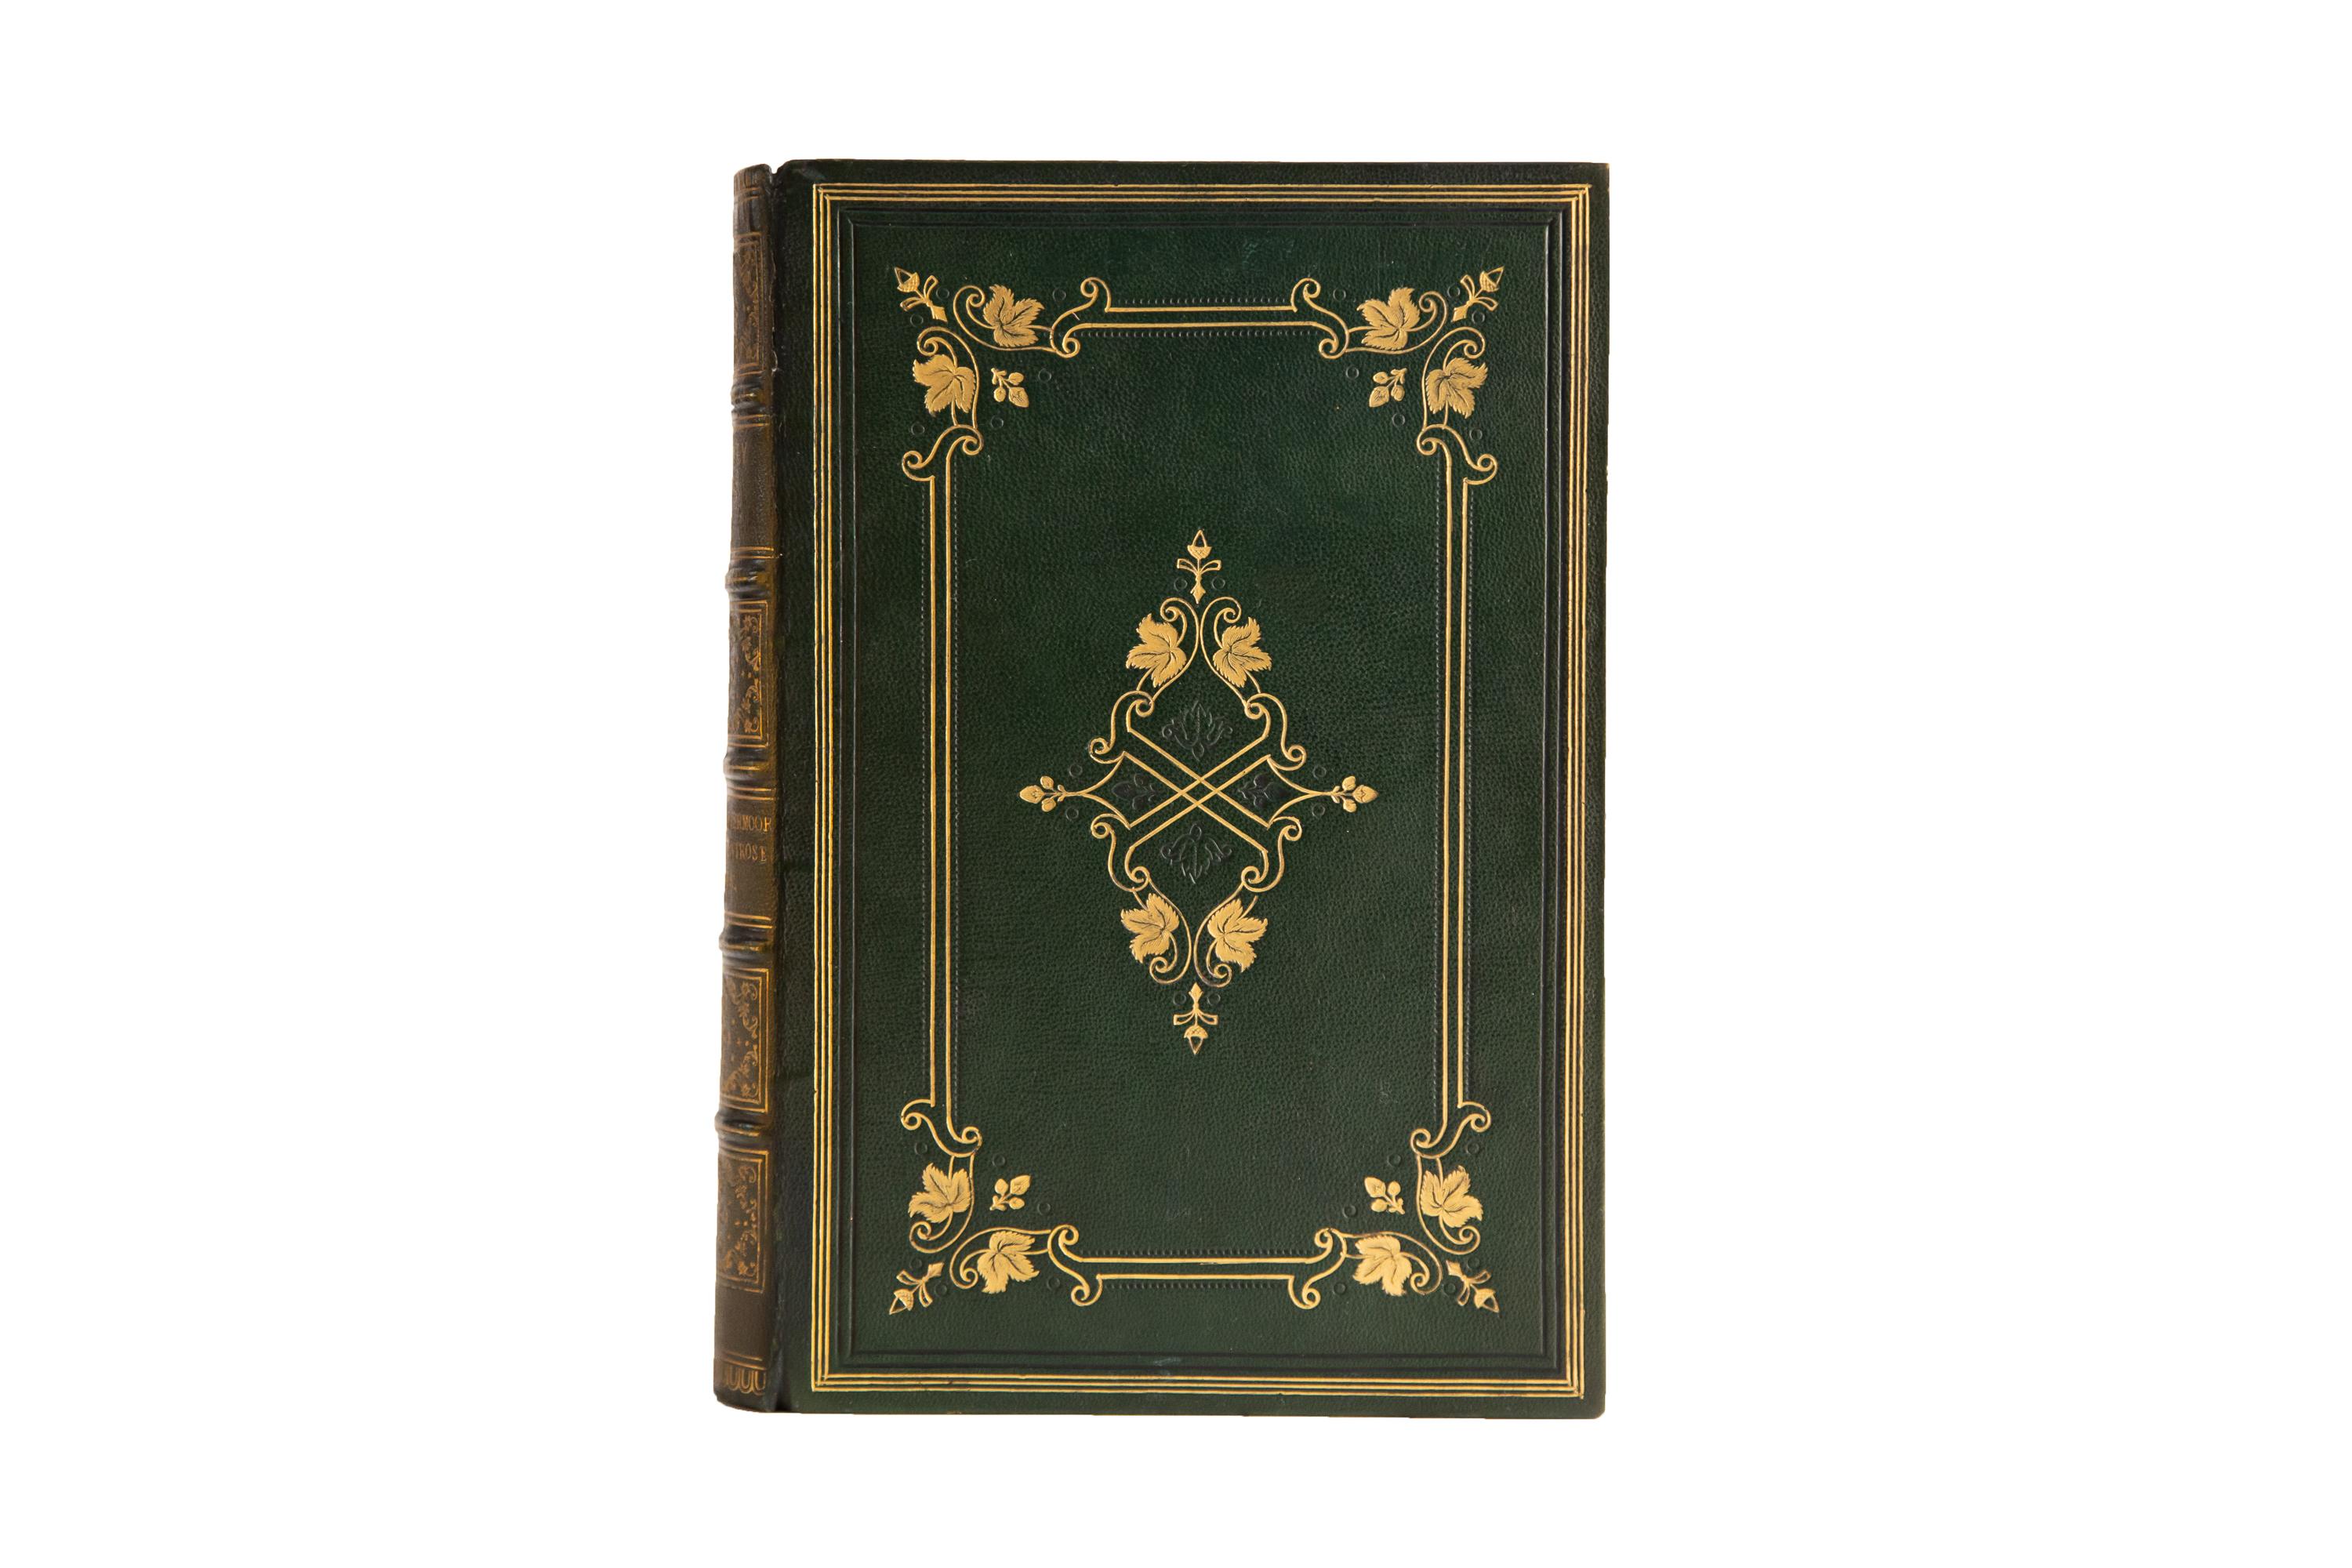 12 Volumes. Sir Walter Scott, The Waverly Novels. Bound in full green morocco with ornate floral and ruled gilt and open tooling. The spines display raised bands, ornately detailed panels, and label lettering, all gilt-tooled. All of the edges are